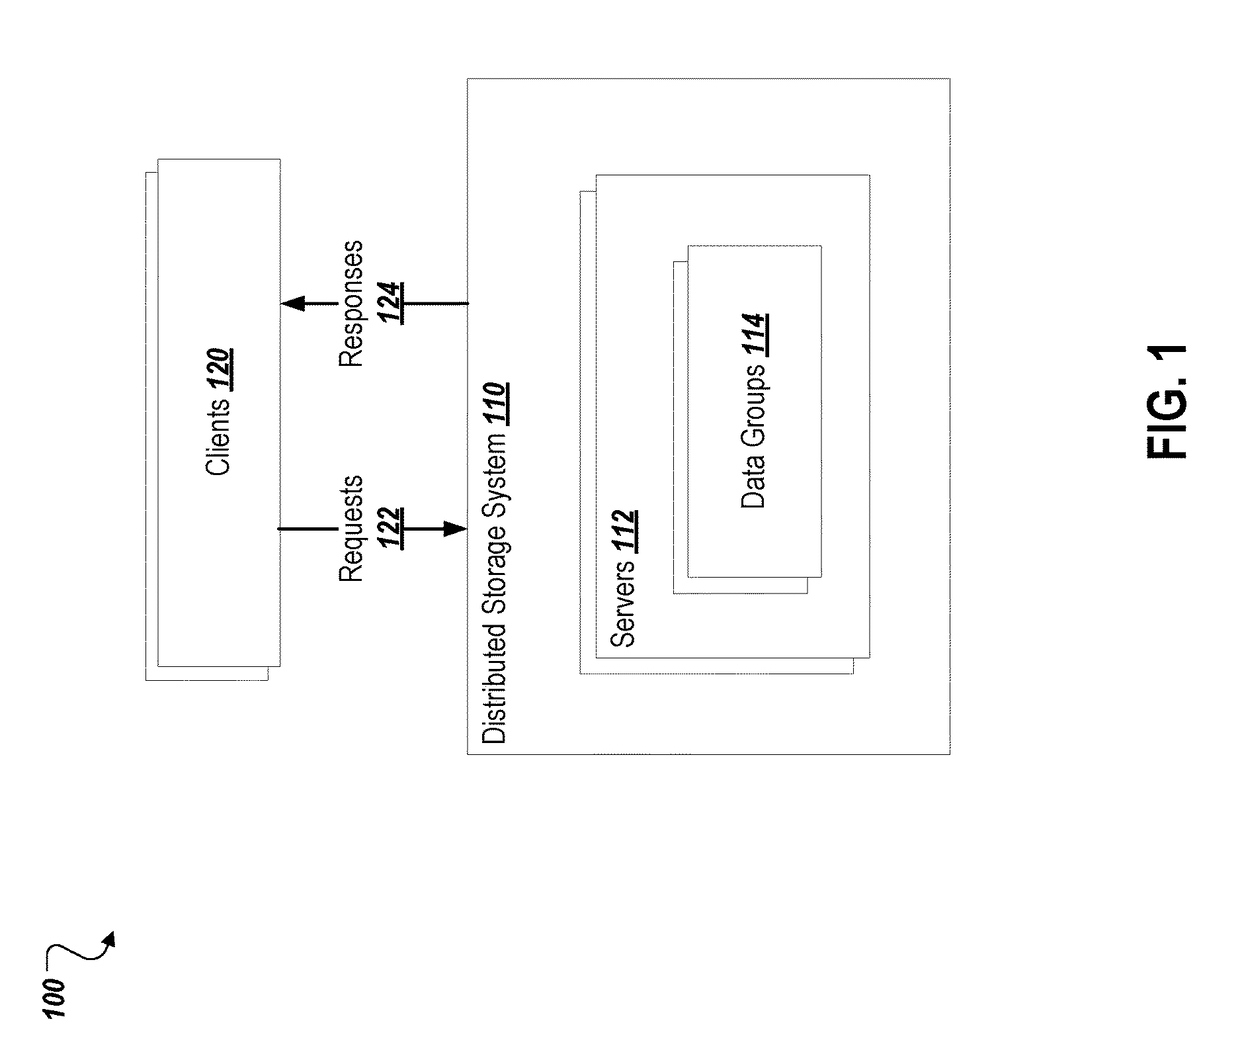 Splitting and moving ranges in a distributed system